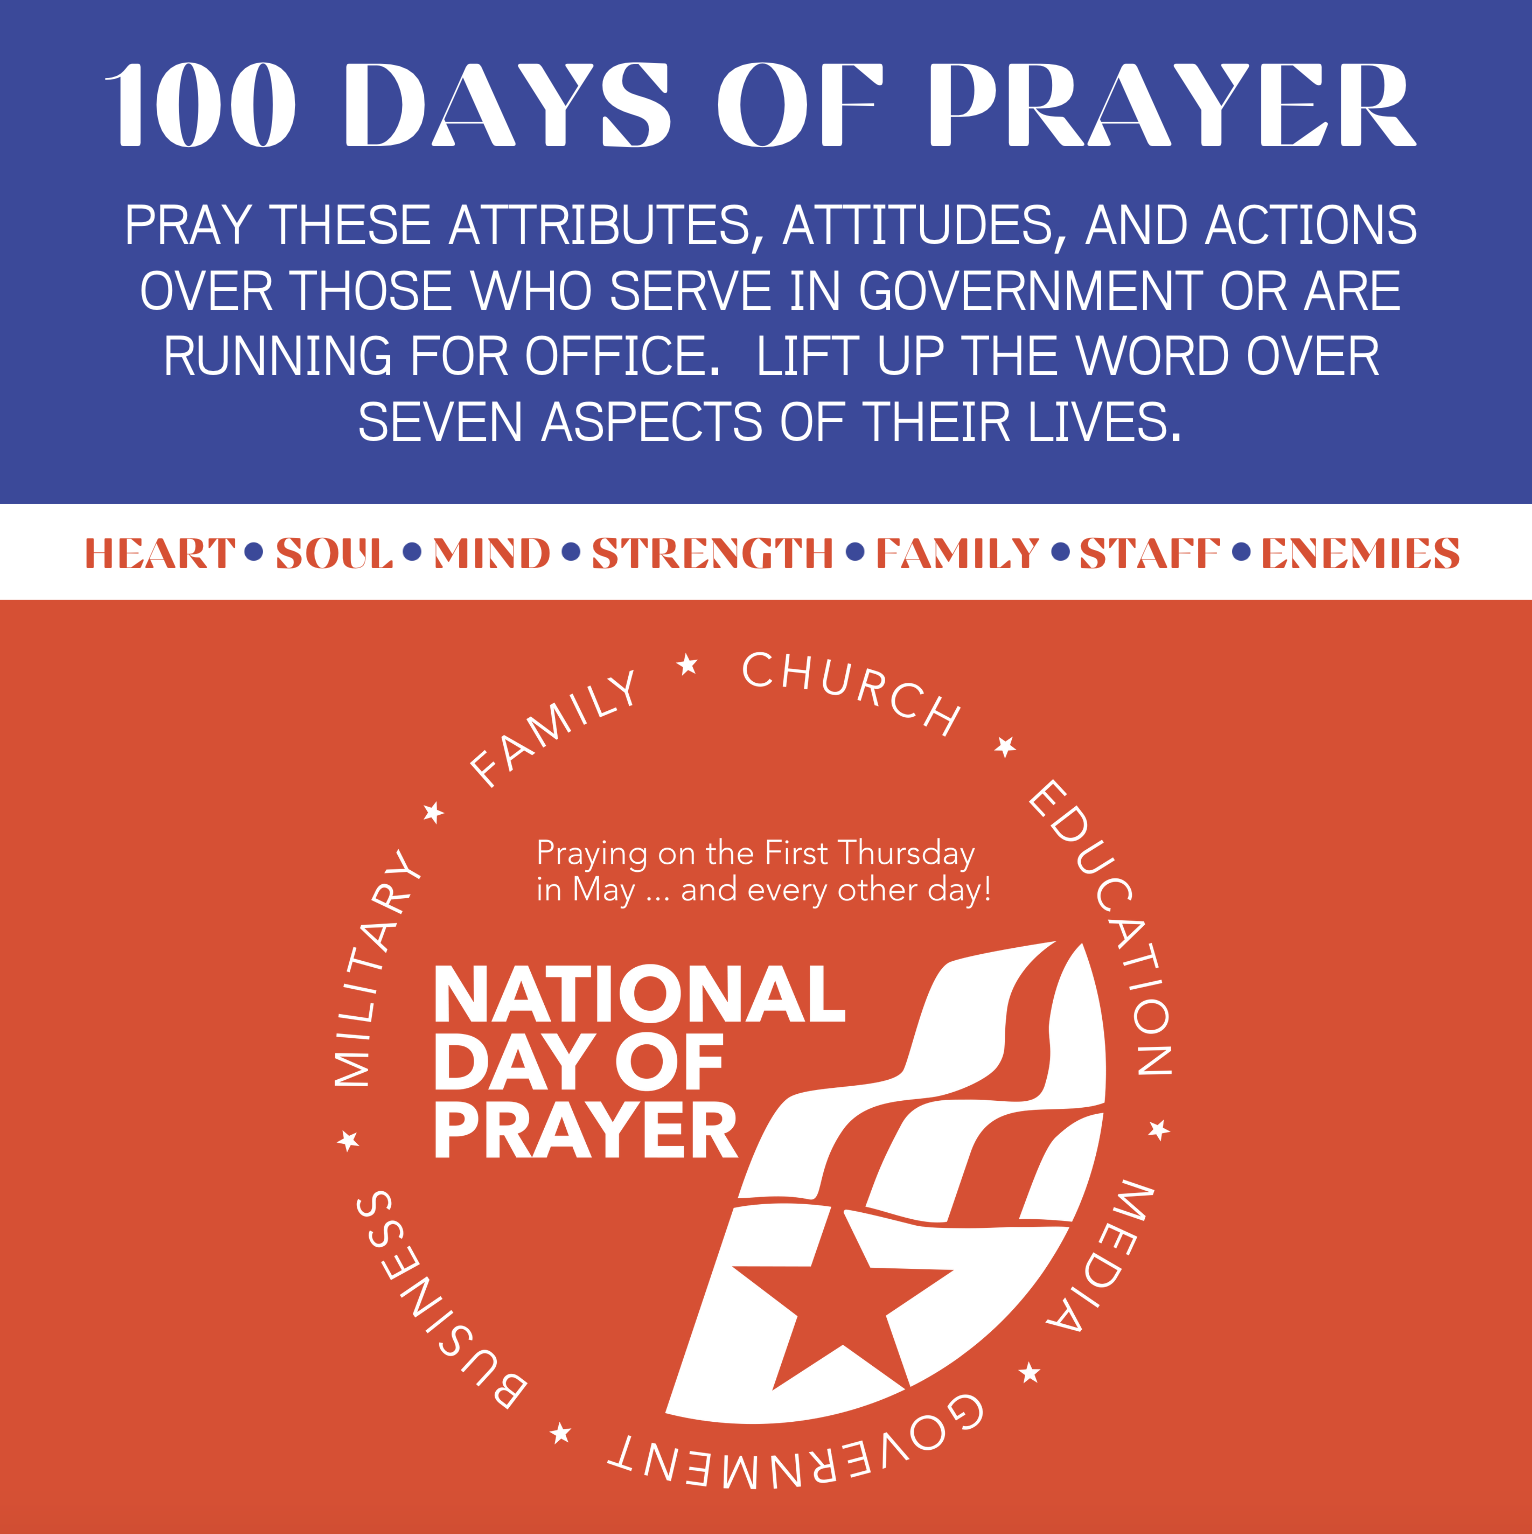 PRAYER GUIDE 100 DAYS GRAPHIC